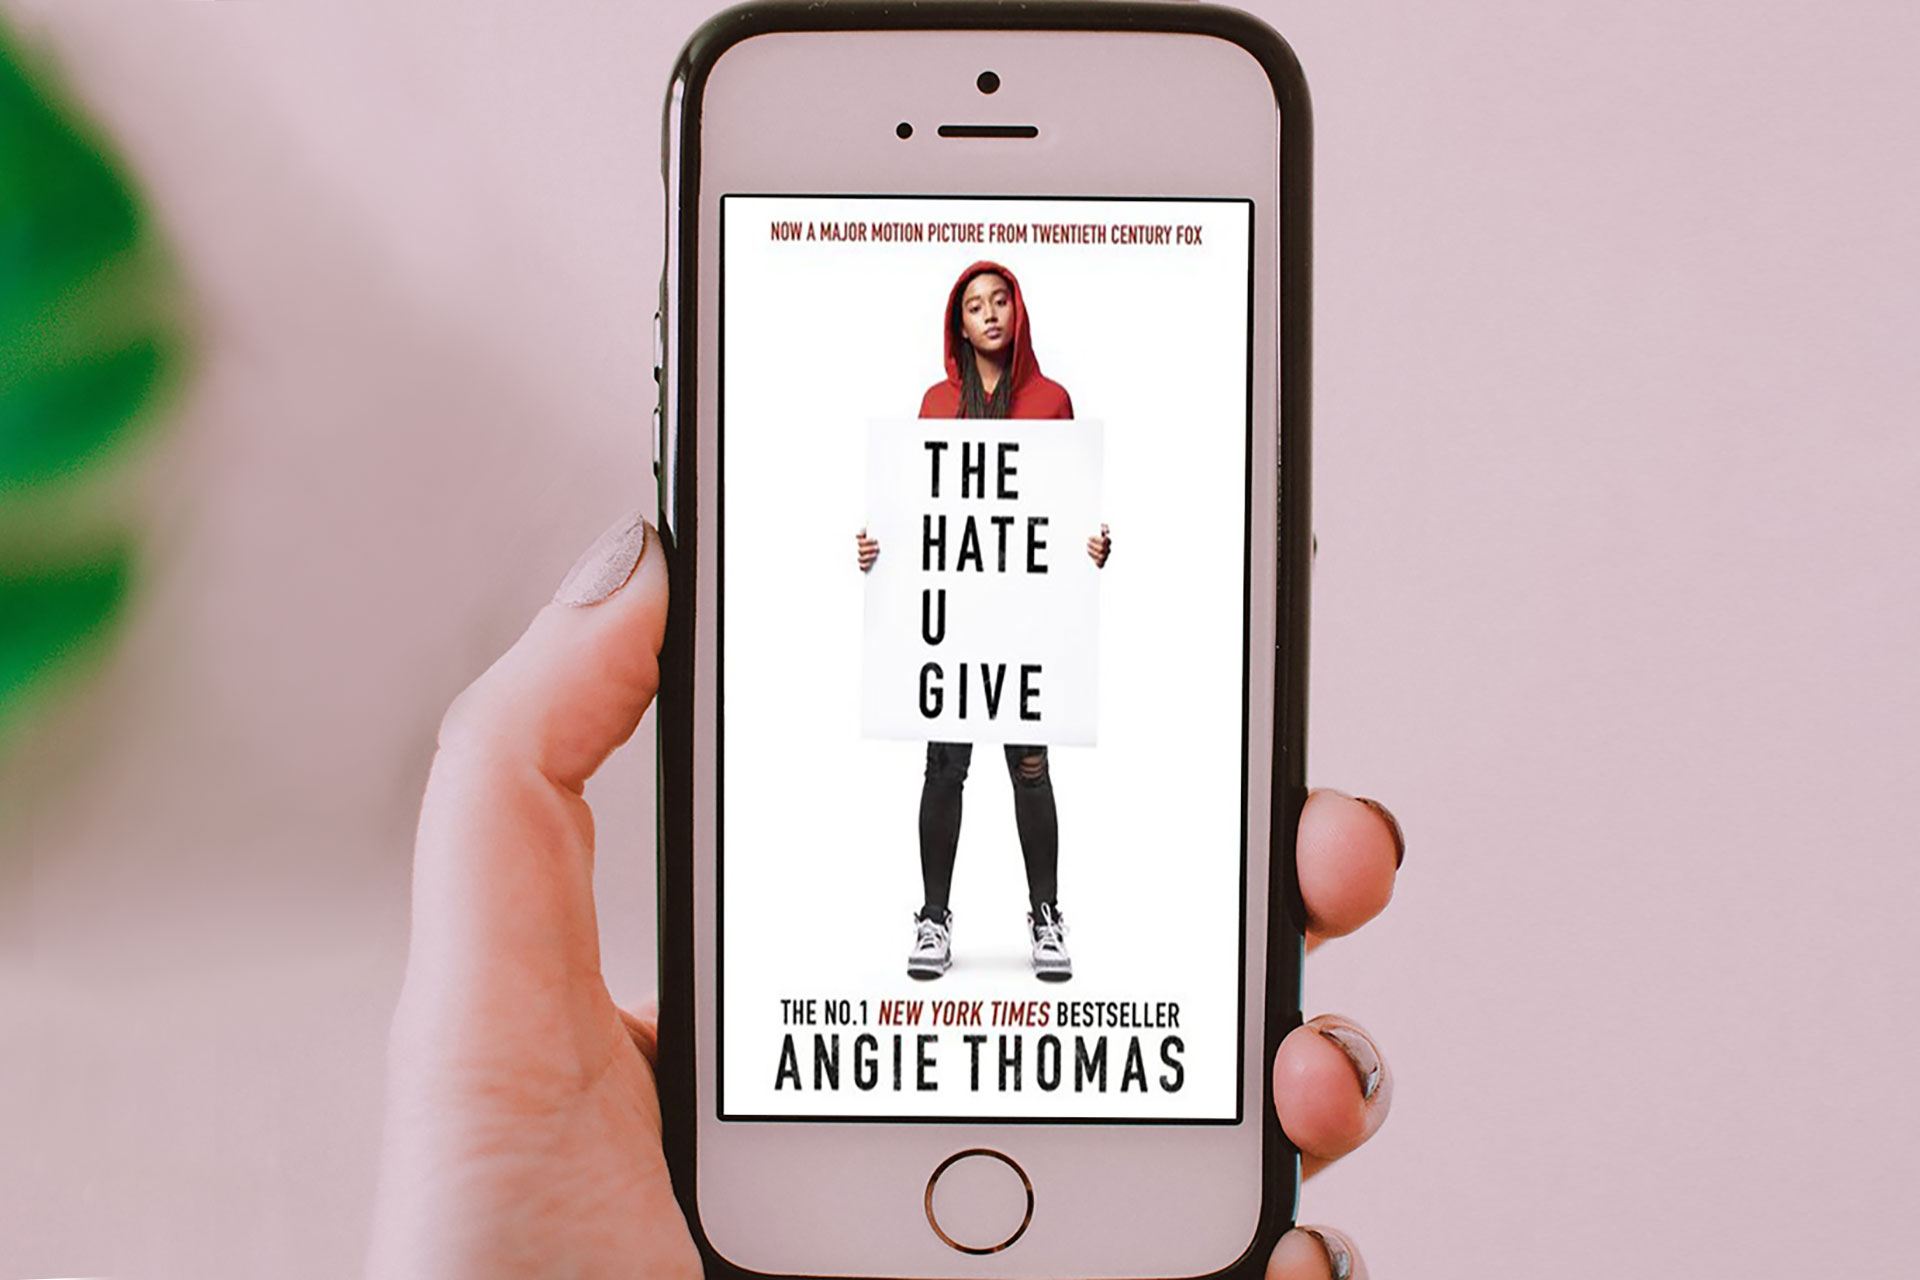 Hand holding mobile phone showing The Hate you Give book cover